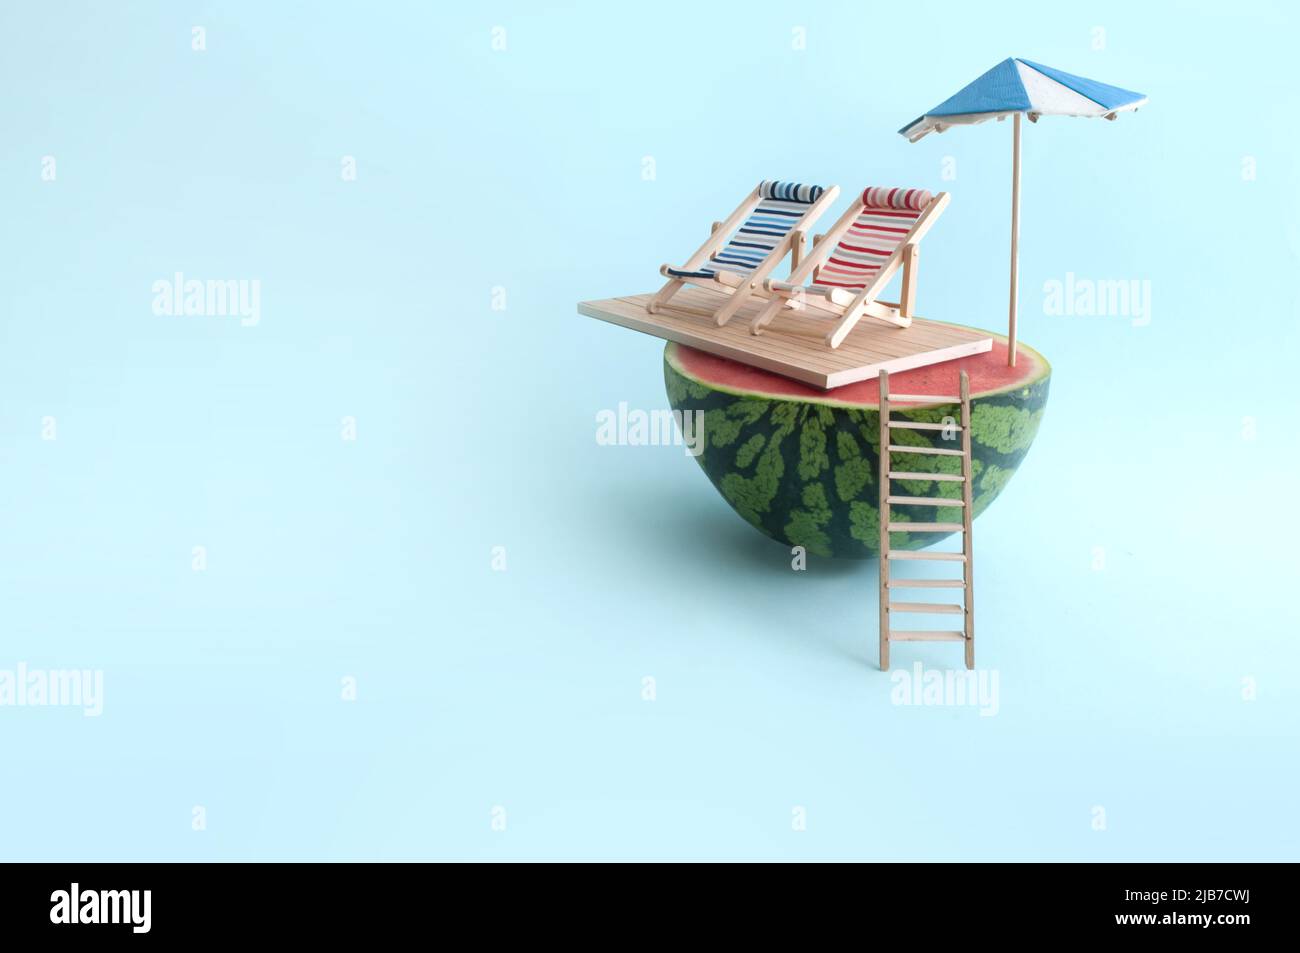 Summer watermelon with parasol,  two deck chairs and wooden beach ladder Stock Photo